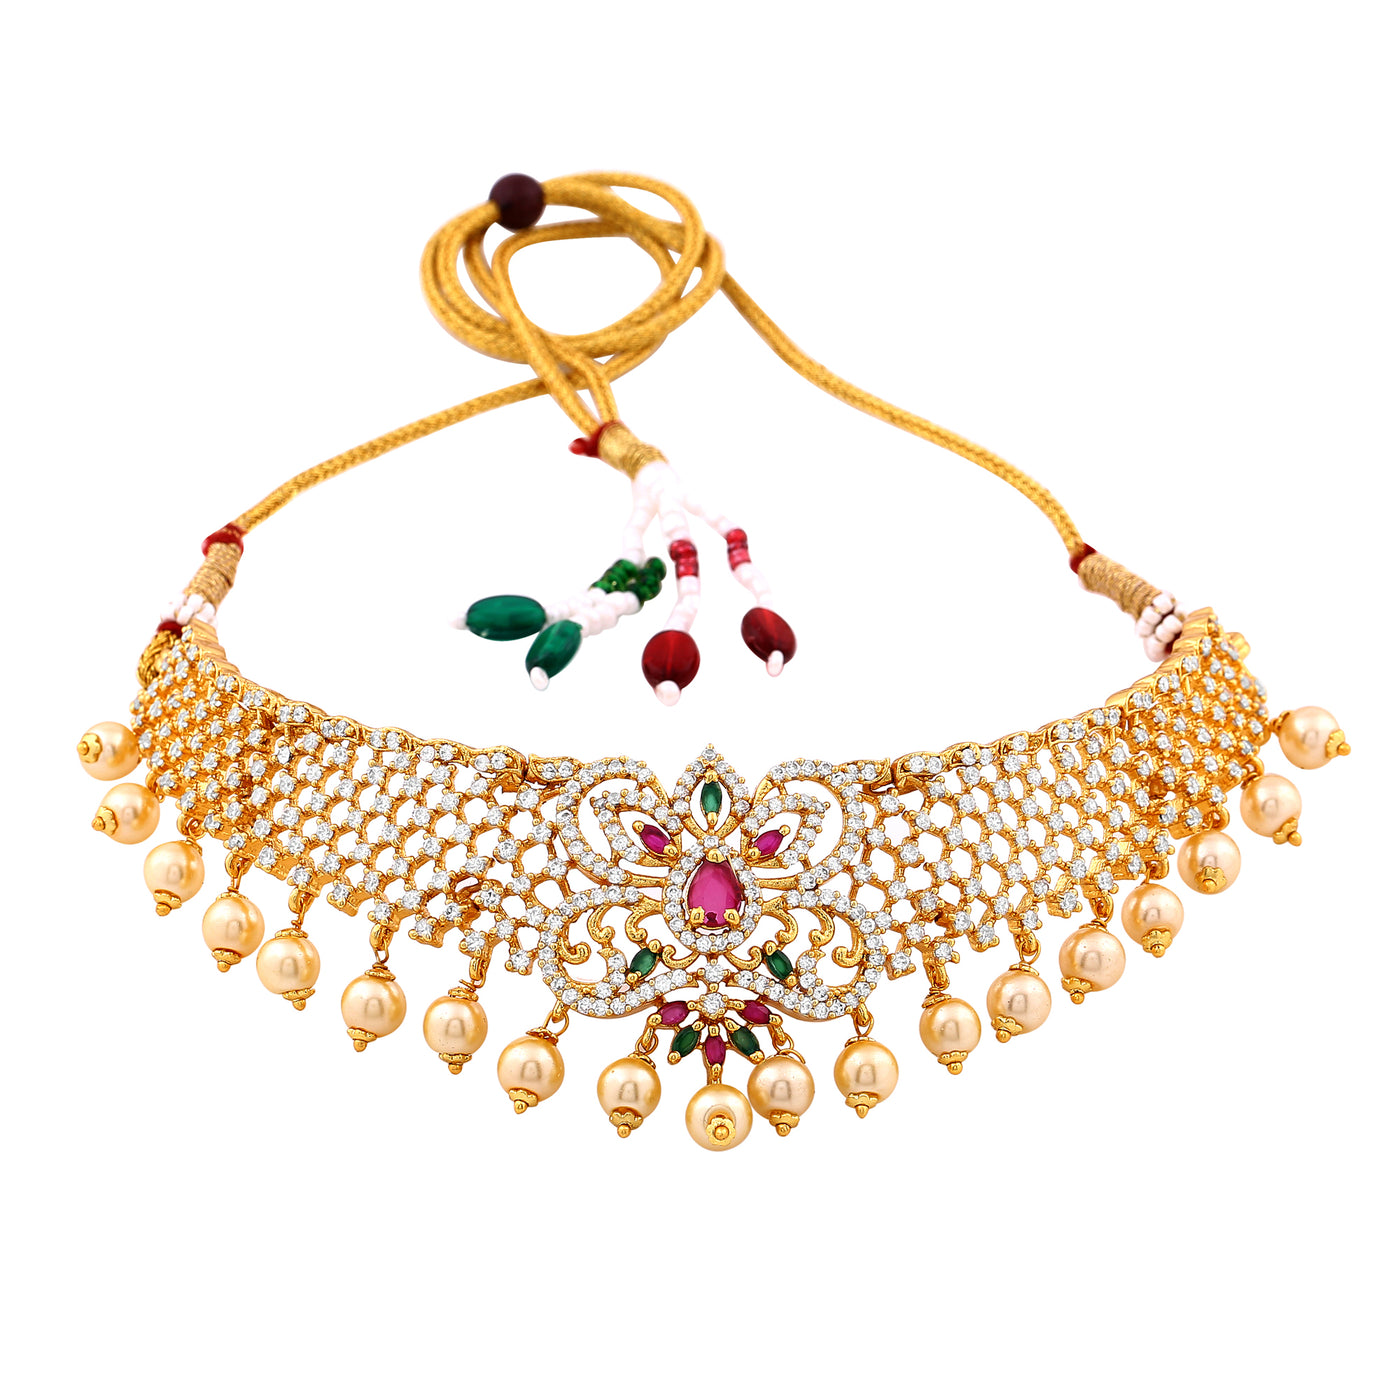 Estele Gold Plated CZ Elegant Bridal Choker Necklace Set with Colored Stones & Pearls